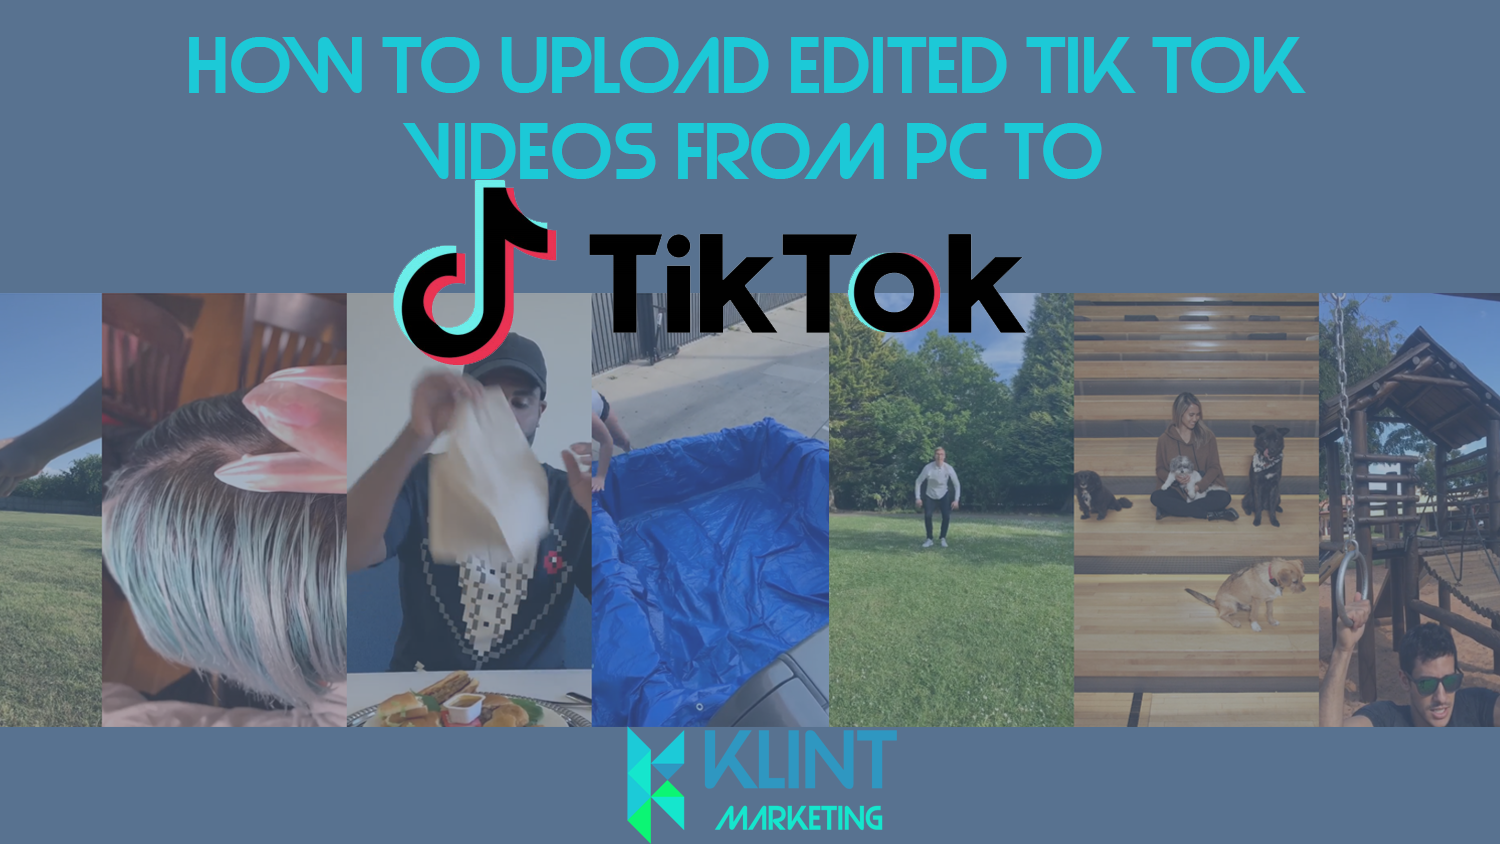 How To Upload Edited Tik Tok Videos From Pc To Tik Tok 2020 Klint Marketing The Best Growth Hacking Agency In Copenhagen - animations not being uploaded to roblox correctly issue